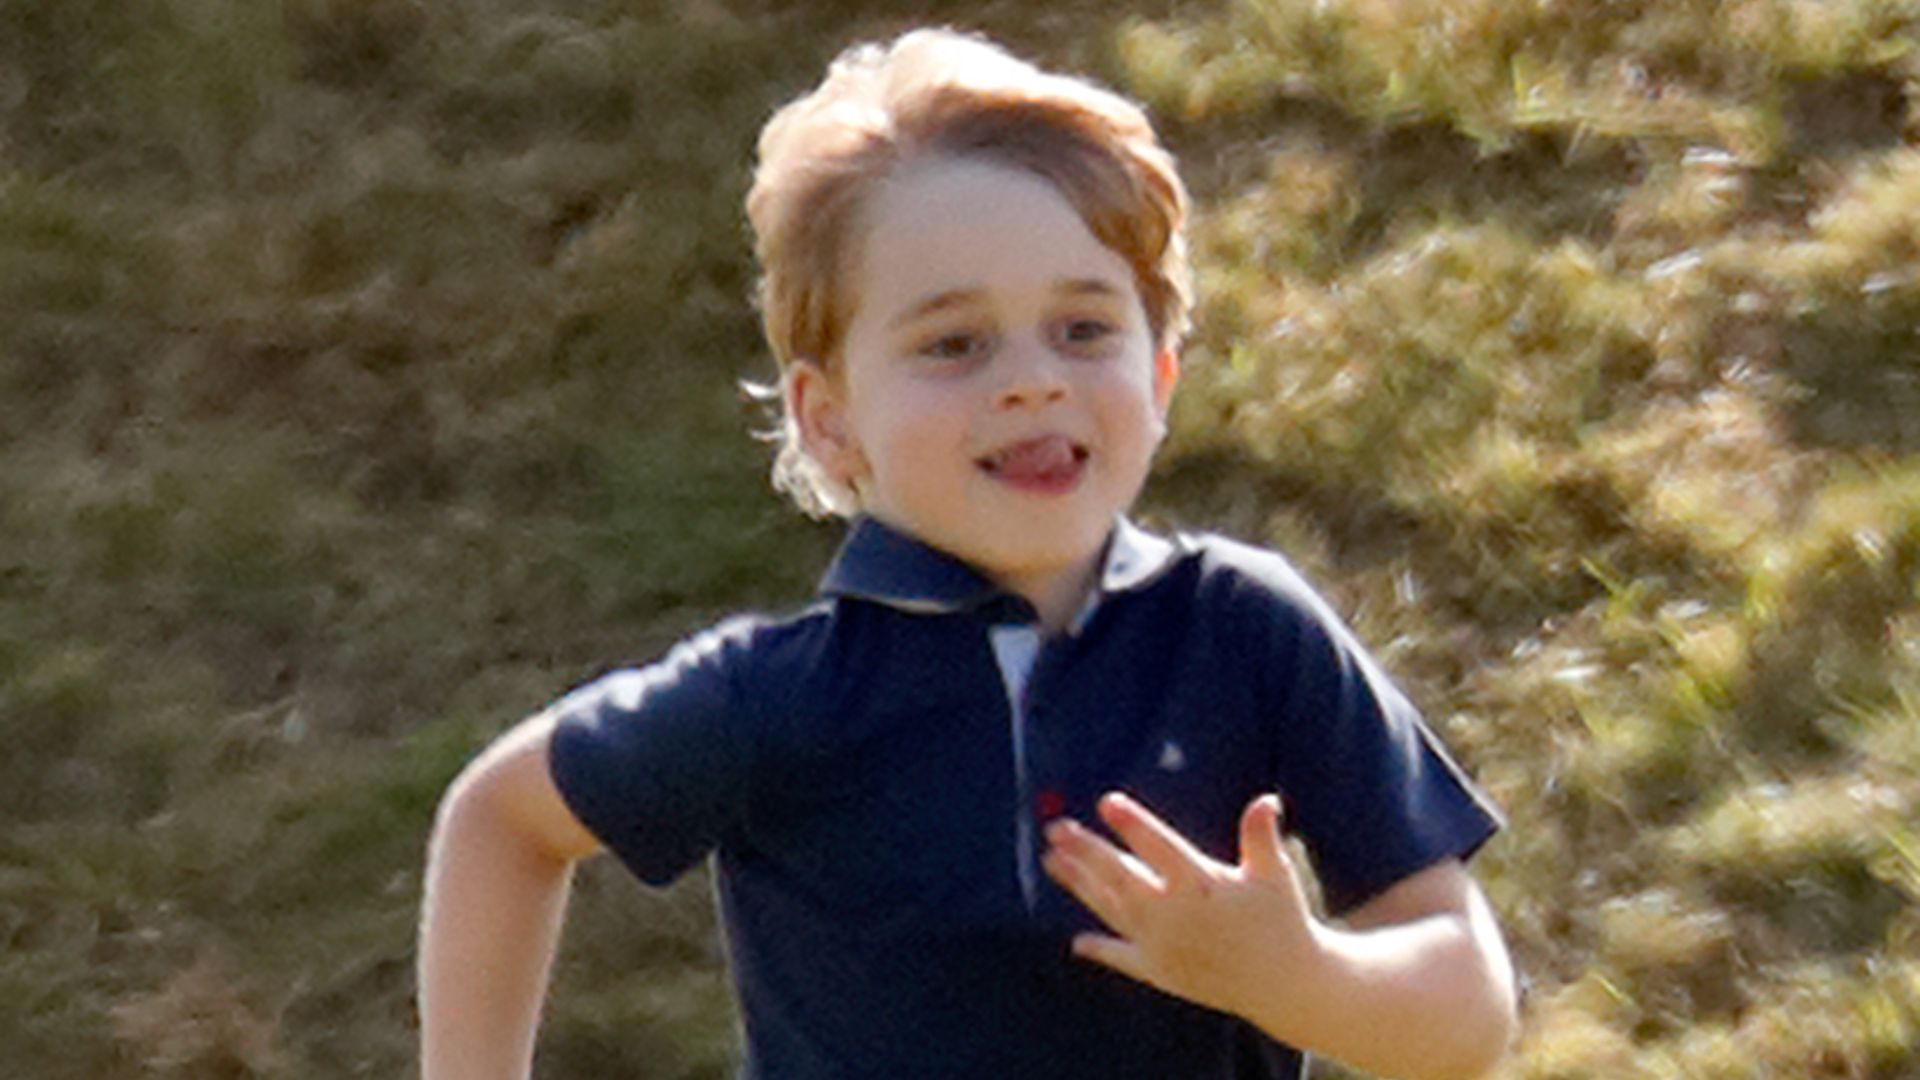 Prince George's birthday celebrated with a very special gift – see it here